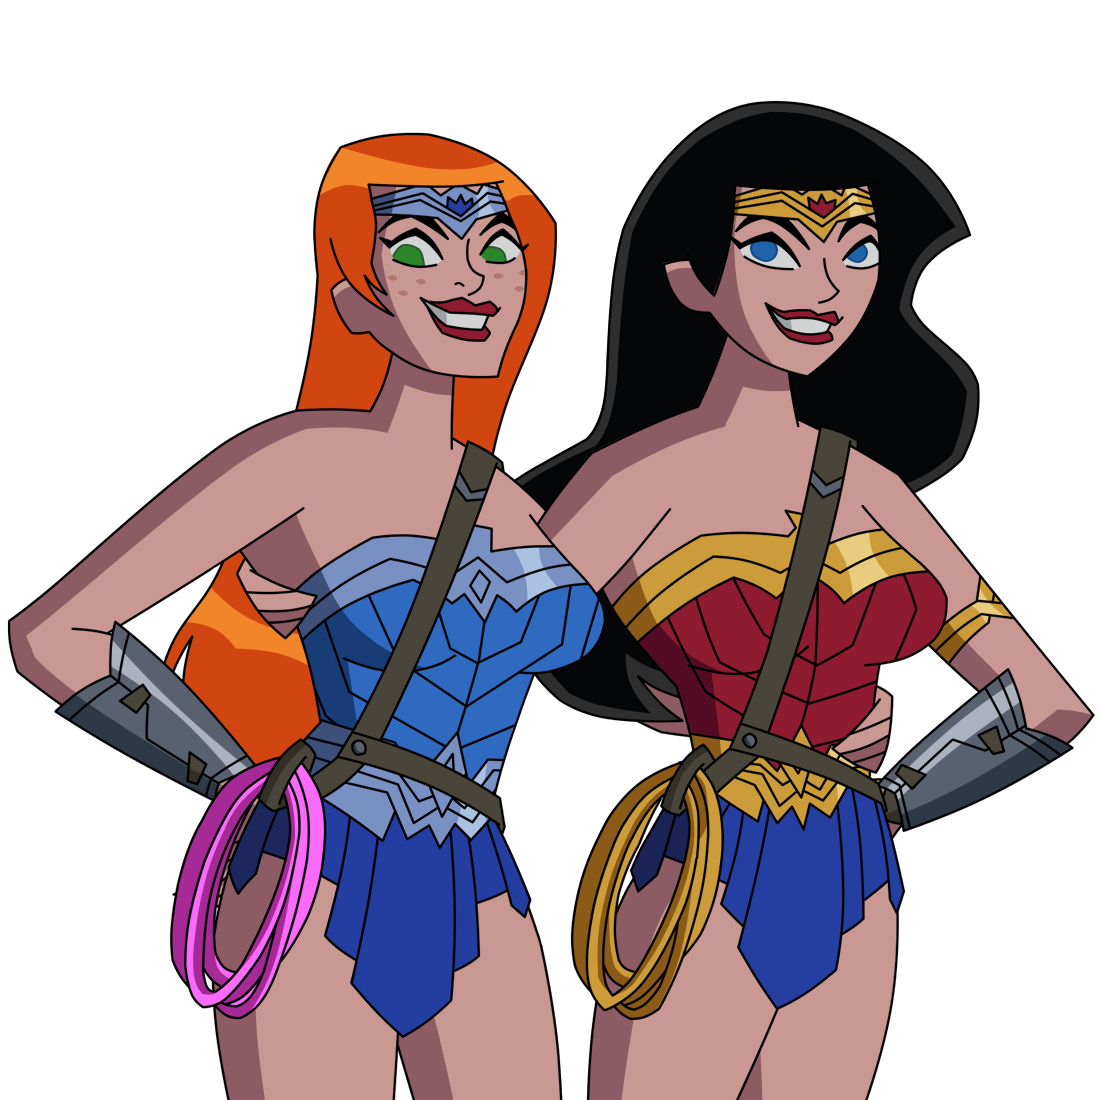 Wonder Woman Family Animated Style by Femmes-Fatales on DeviantArt